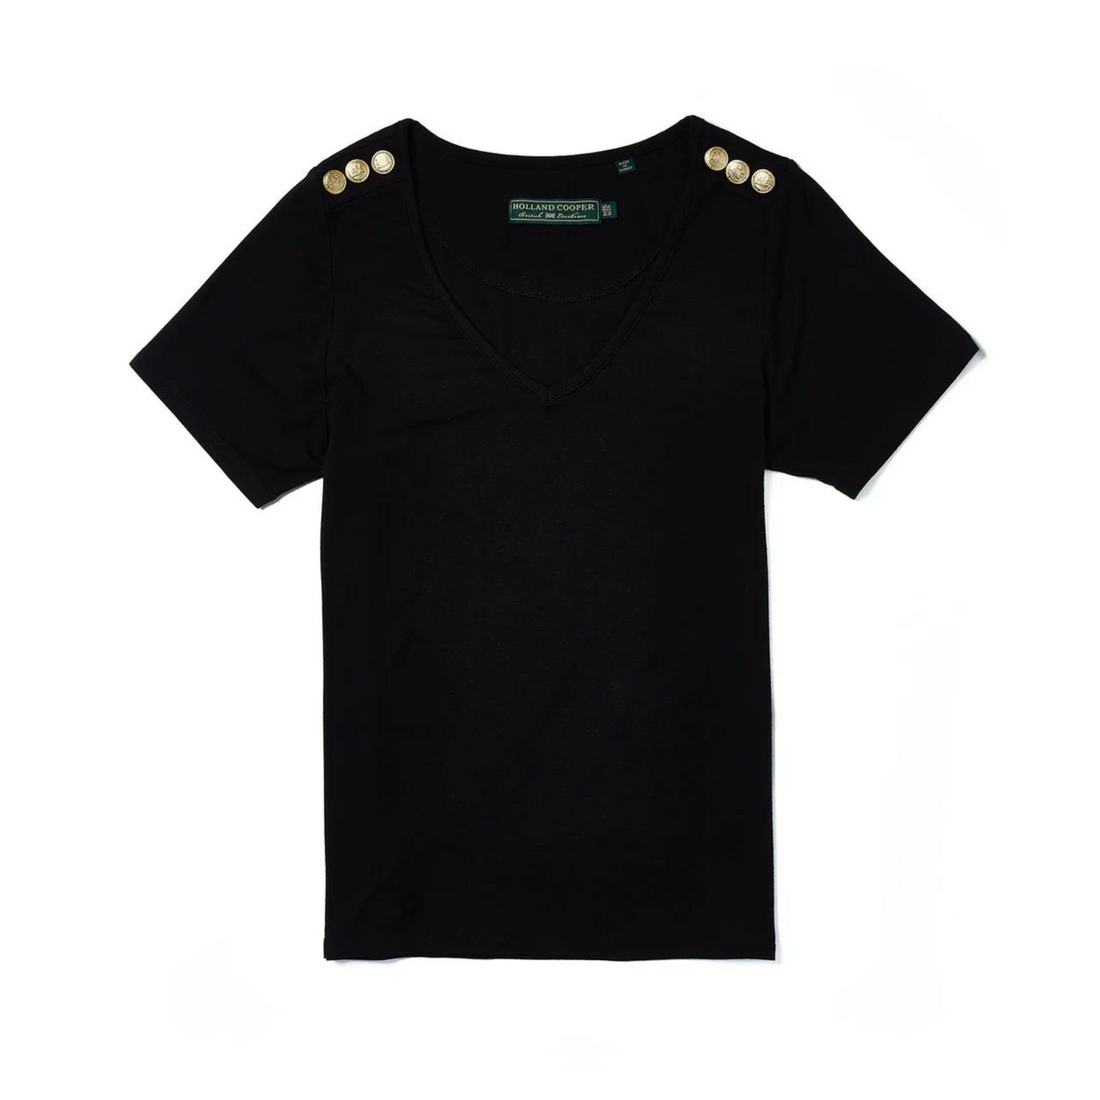 Relax Fit V-Neck Tee Black